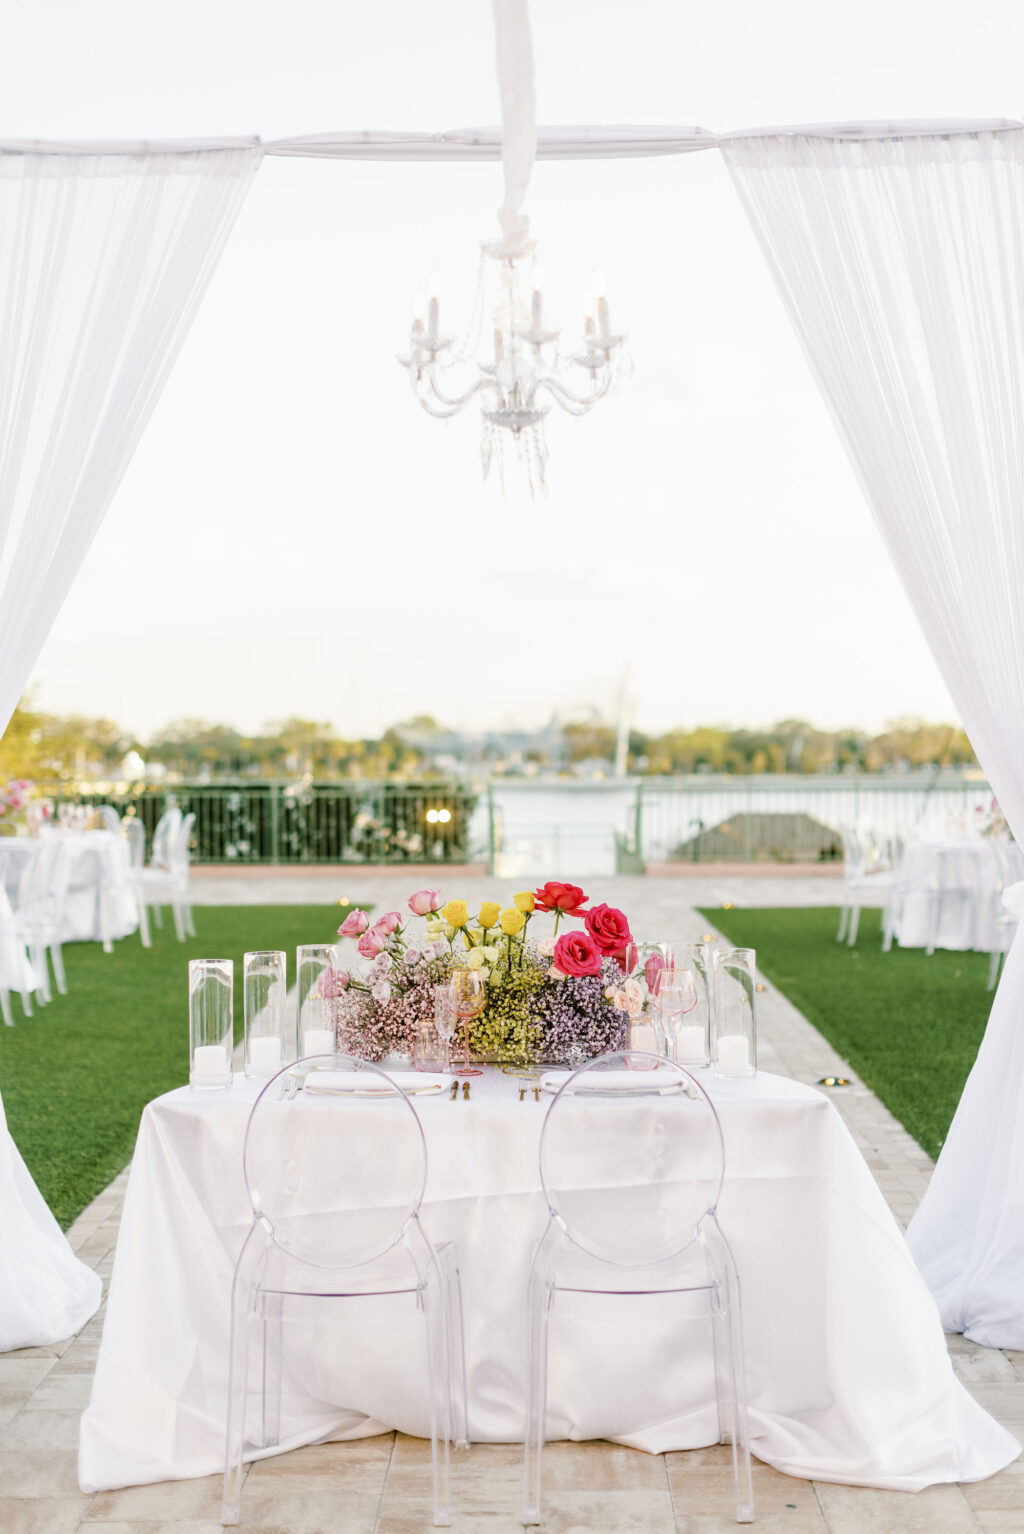 Outdoor Garden Sweetheart Reception Table with Ghost Chairs Chandelier and Romantic Drapery | Tampa Bay Rentals Gabro Event Services | Venue The Vinoy